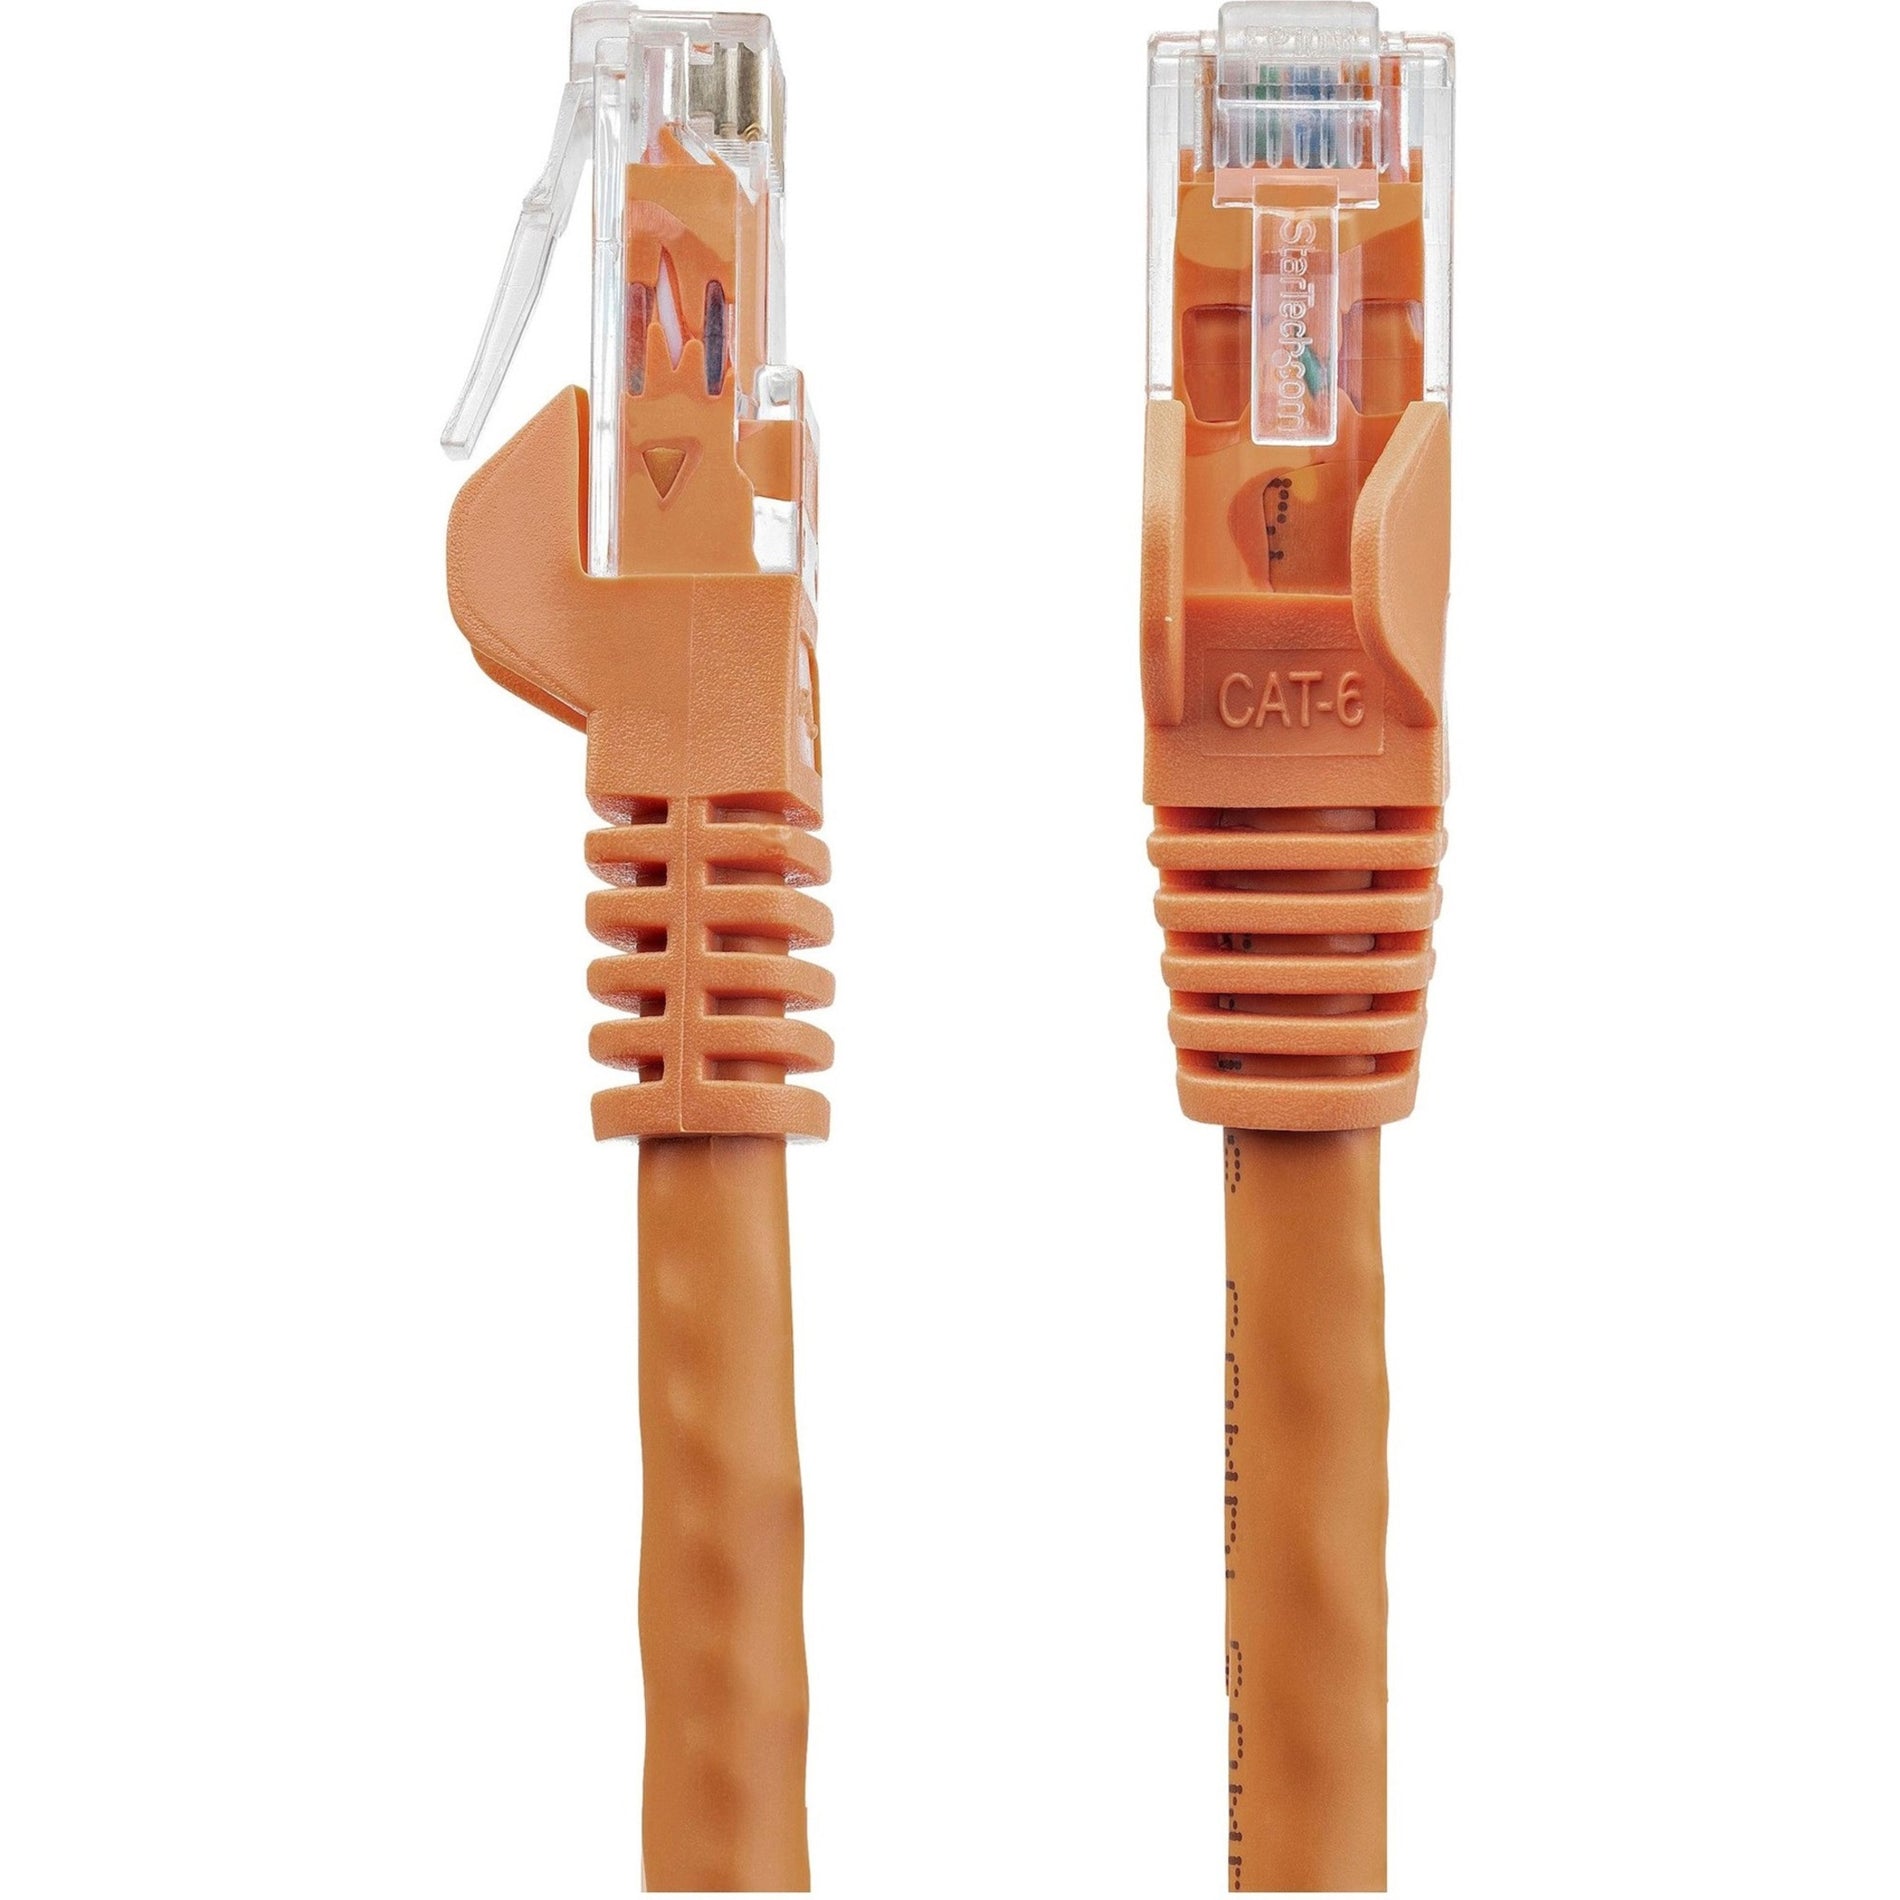 StarTech.com N6PATCH75OR 75 ft. Cat6 Patch Cable - Orange, Lifetime Warranty, 10 Gbit/s Data Transfer Rate, Snagless, Rust Resistant